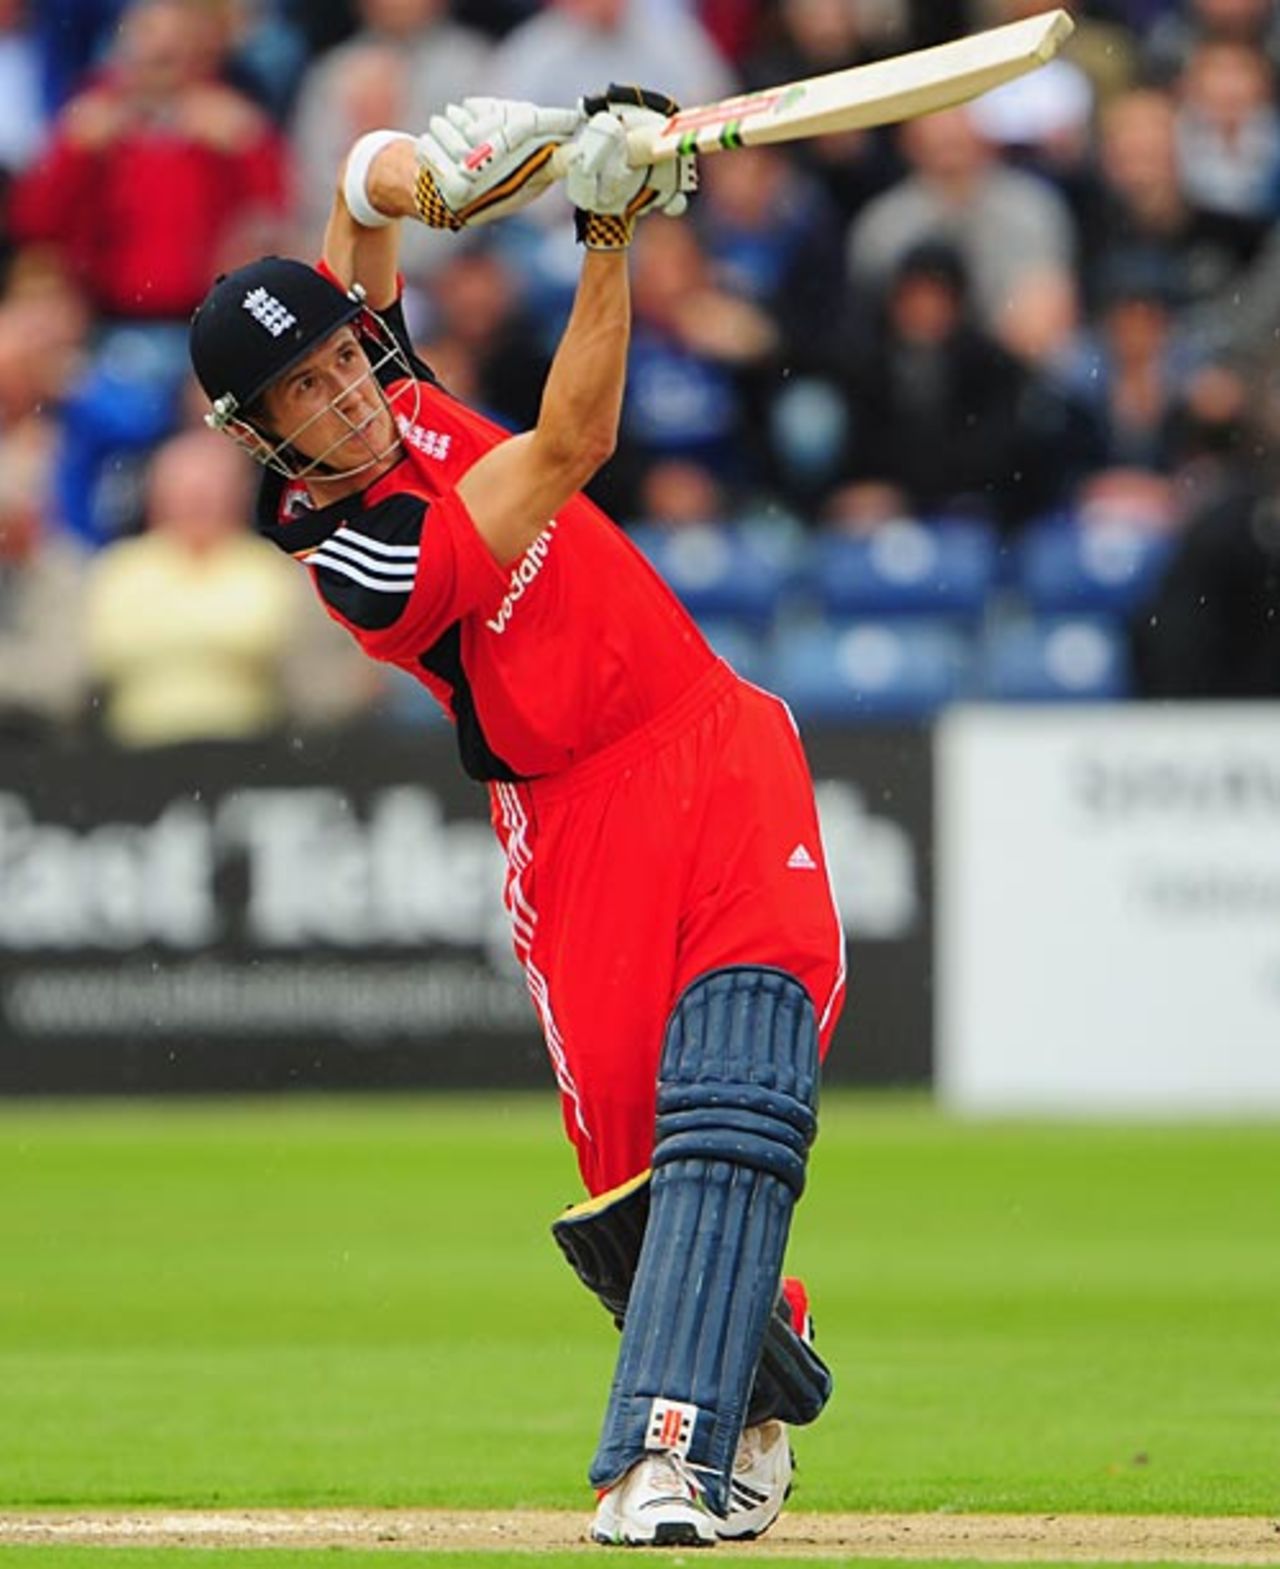 Joe Denly hits over the top, Ireland v England, only ODI, Stormont, August 27, 2009